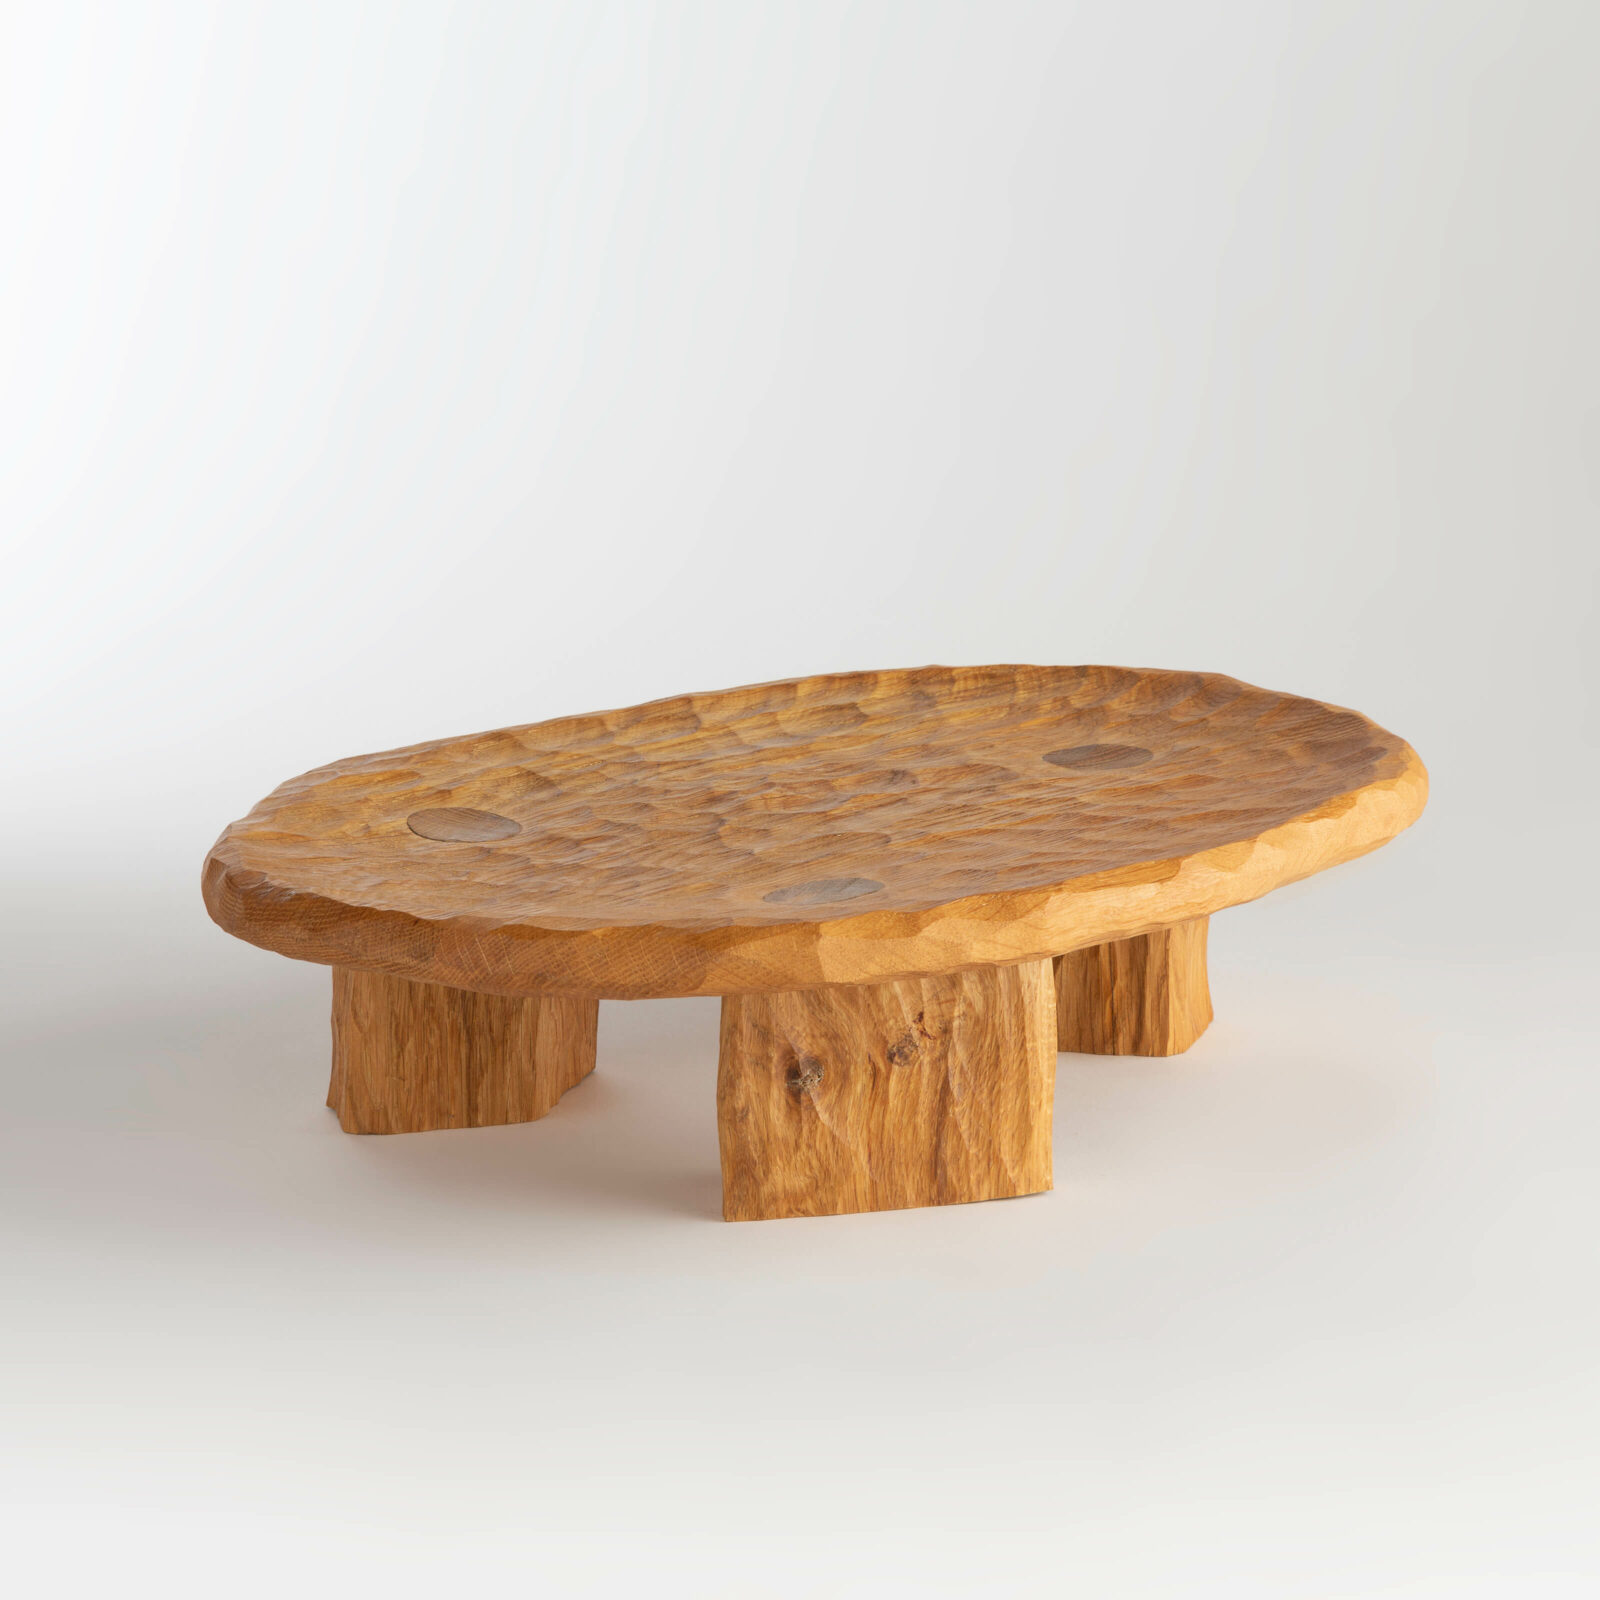 Rosewood table set hover